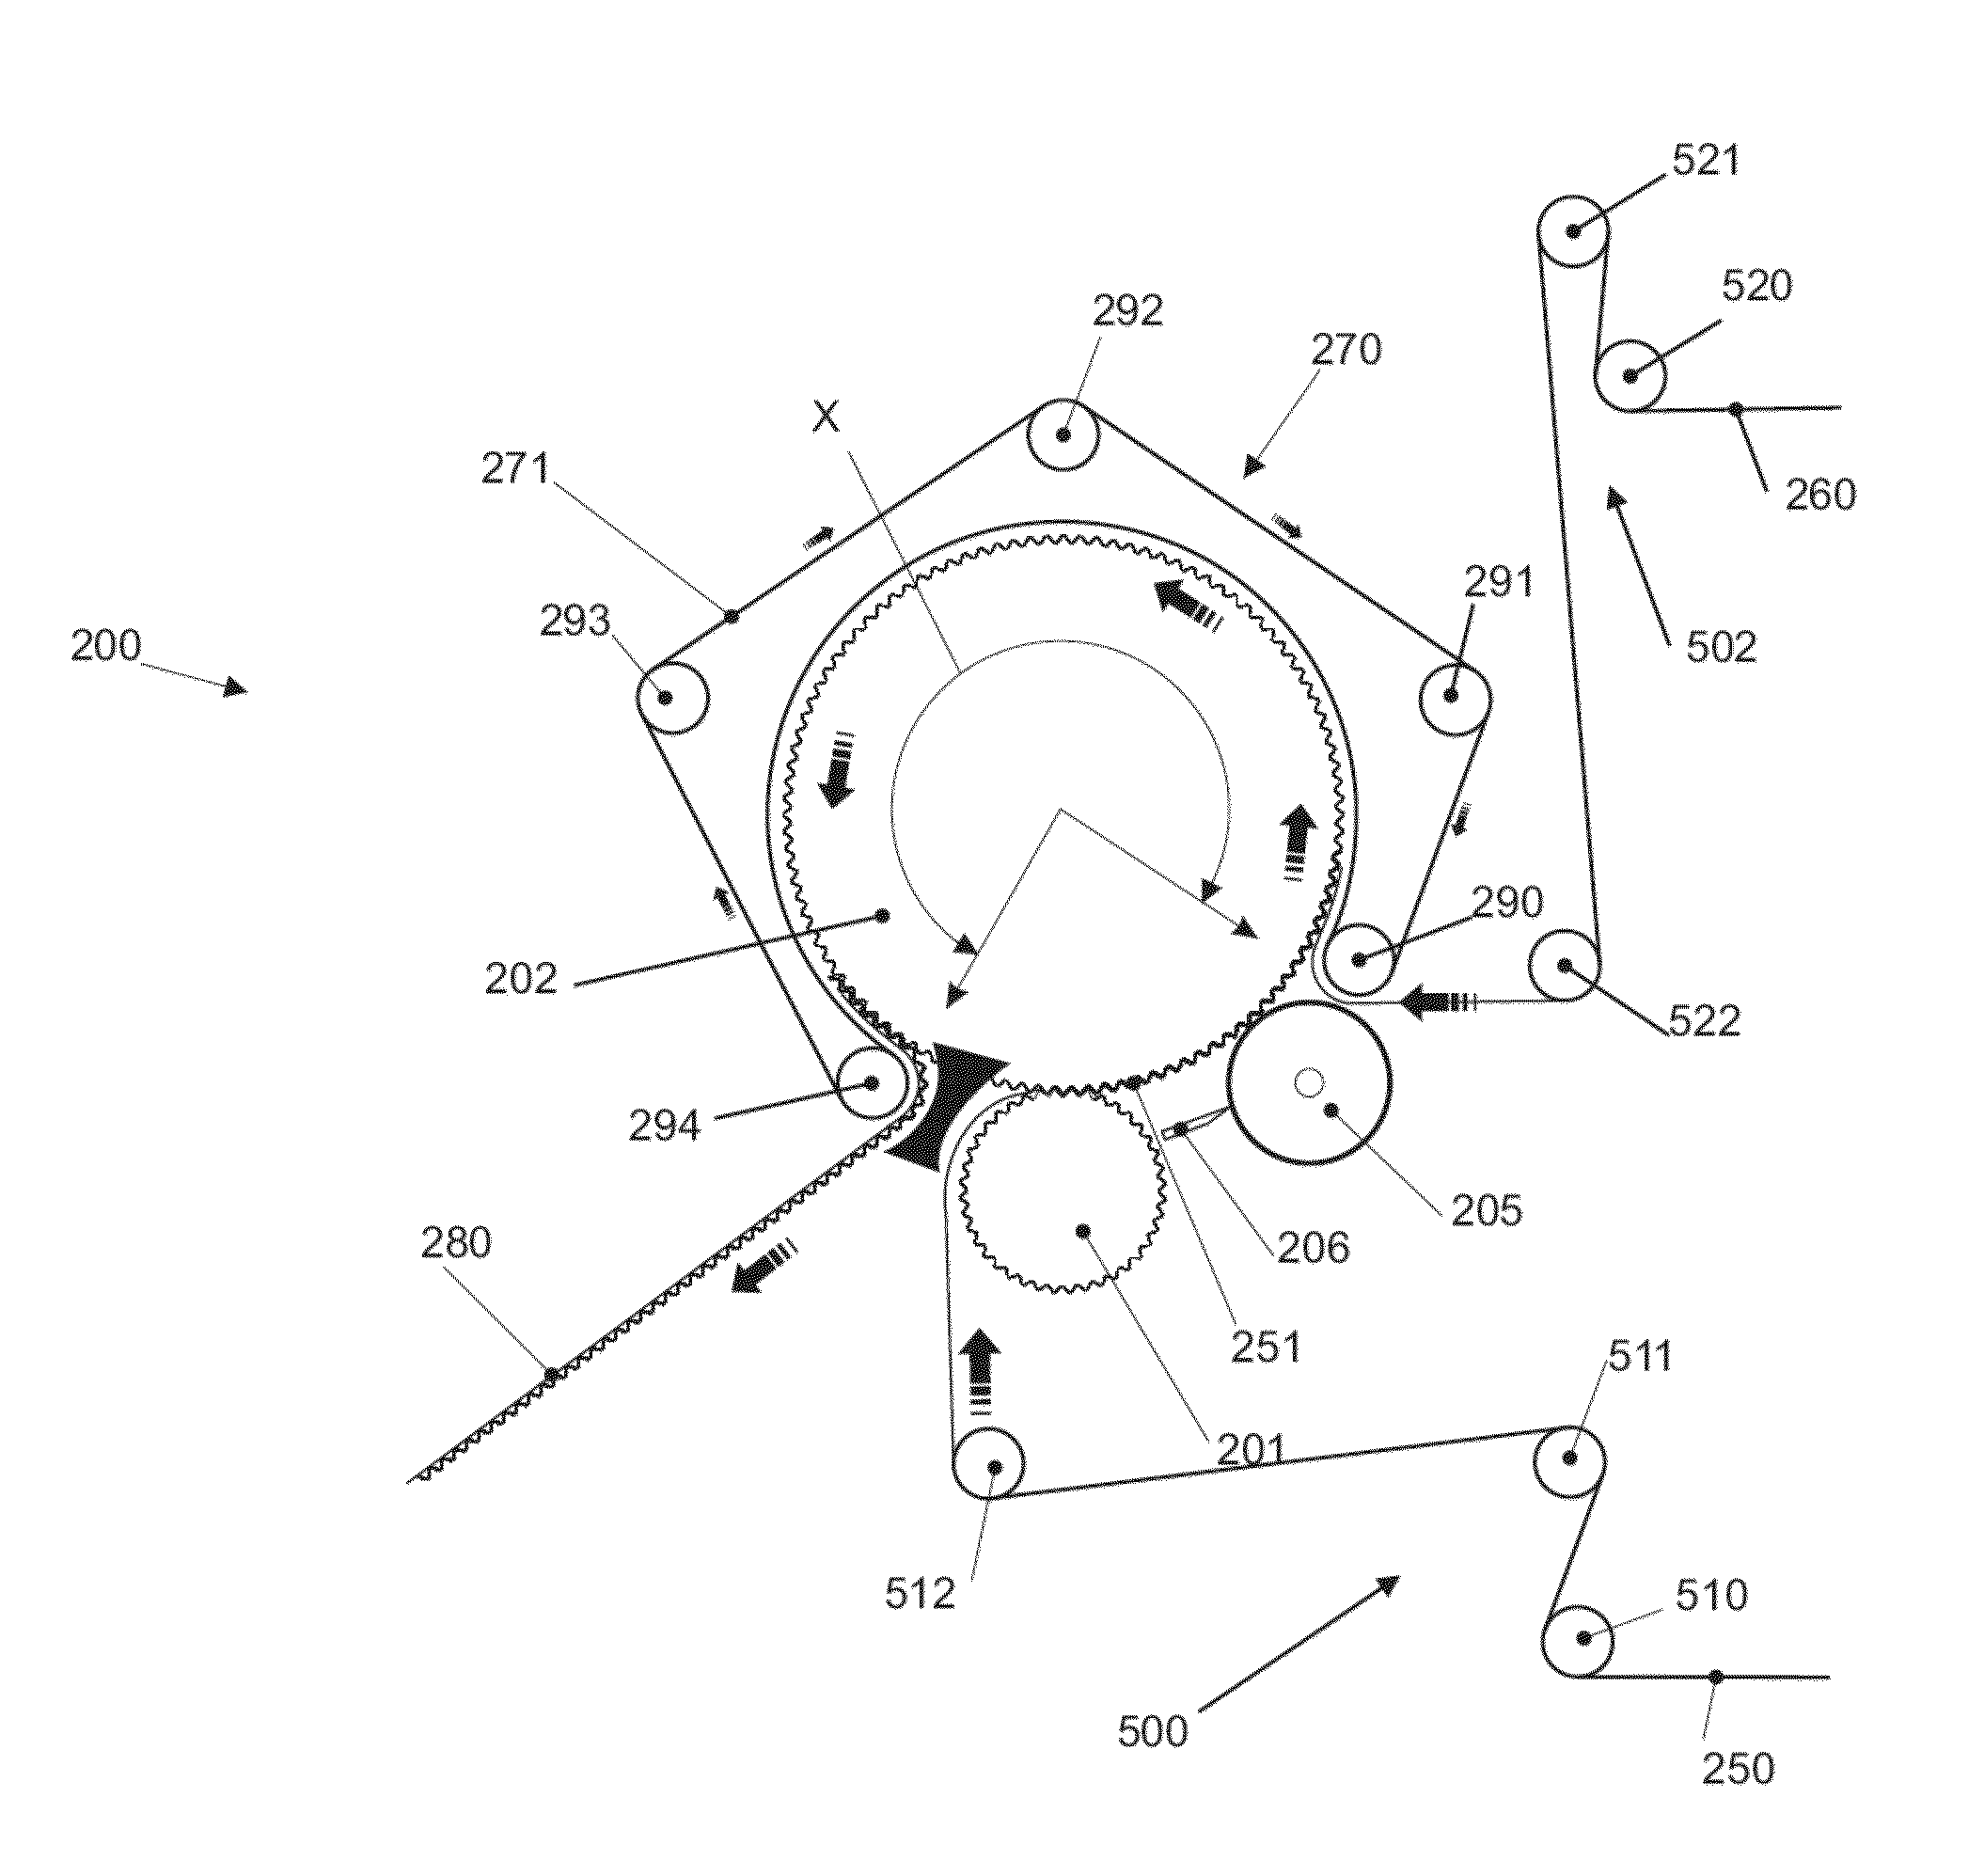 Method and apparatus for forming corrugated board